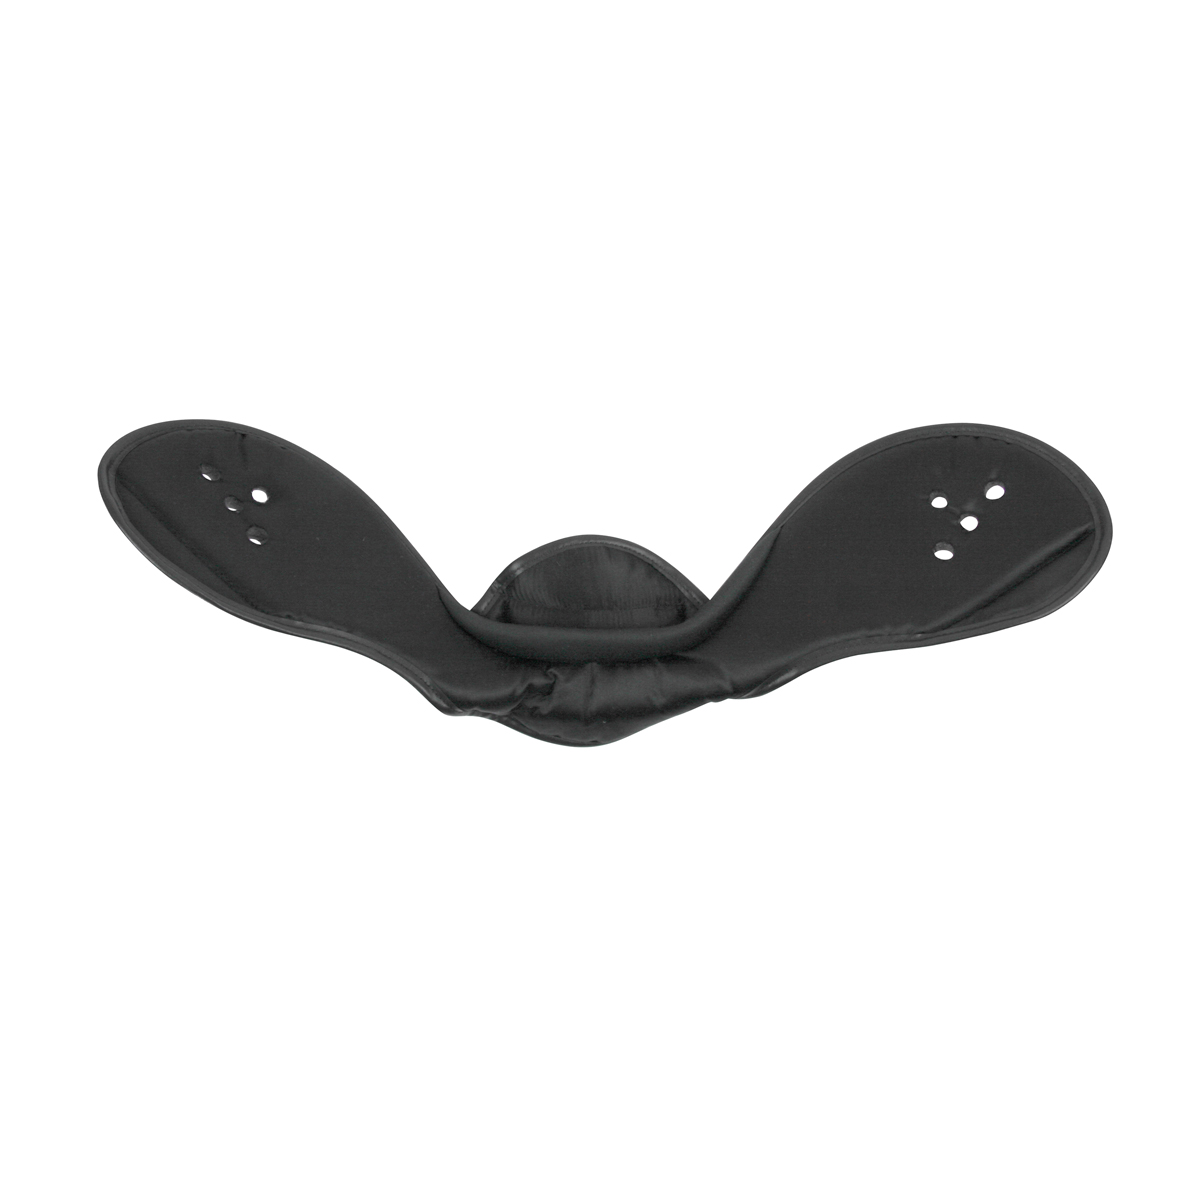 X-Change FIE Contour Epee Mask